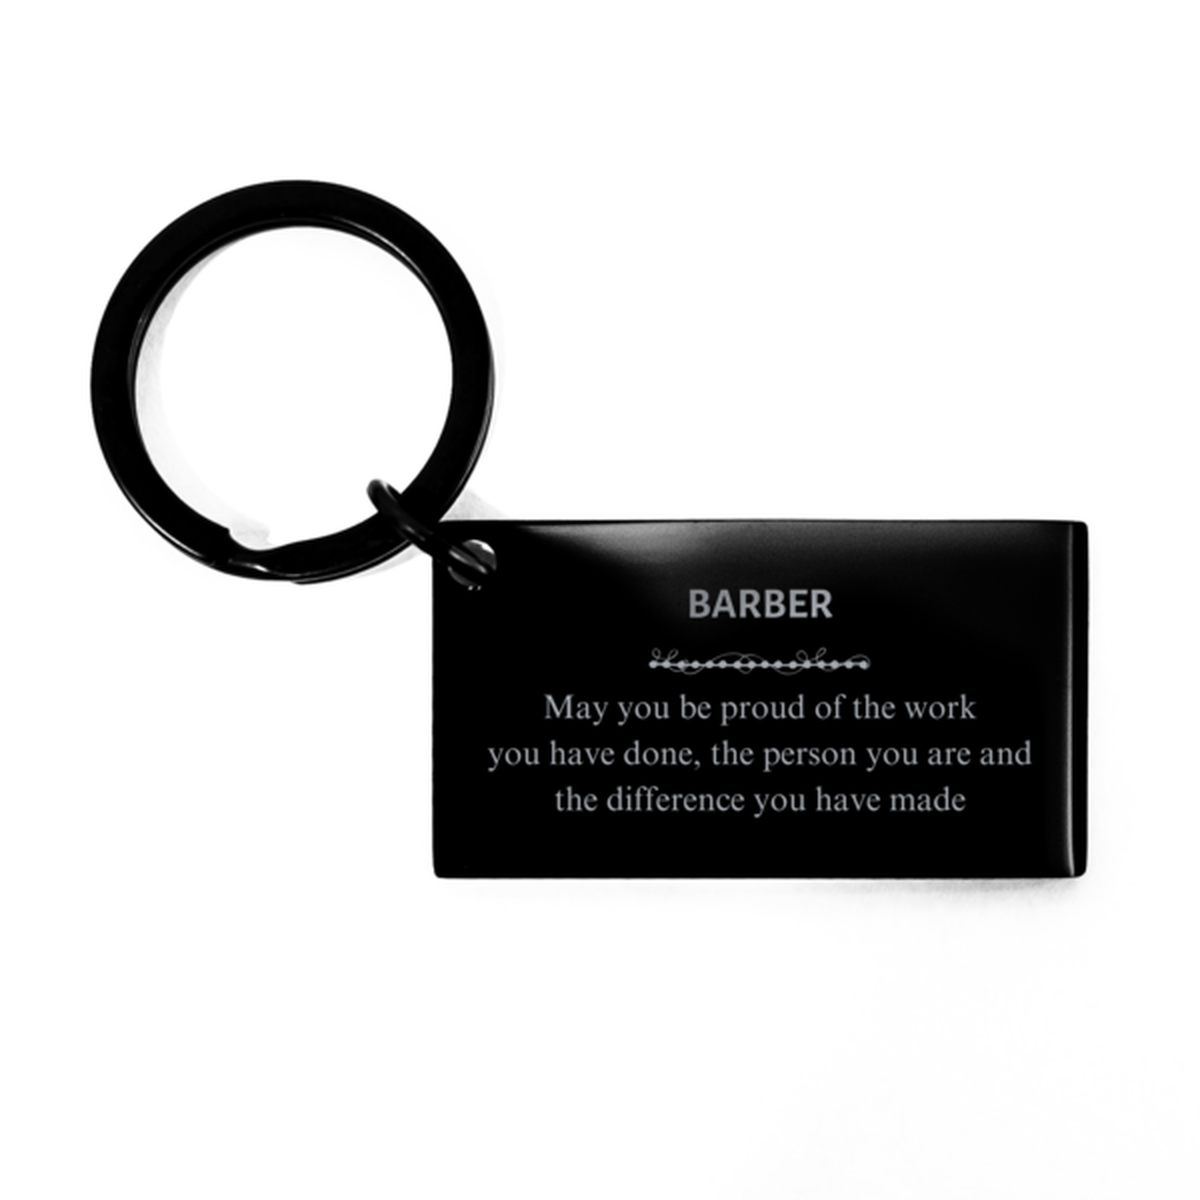 Crime Scene Technician May you be proud of the work you have done, Retirement Barber Keychain for Colleague Appreciation Gifts Amazing for Barber